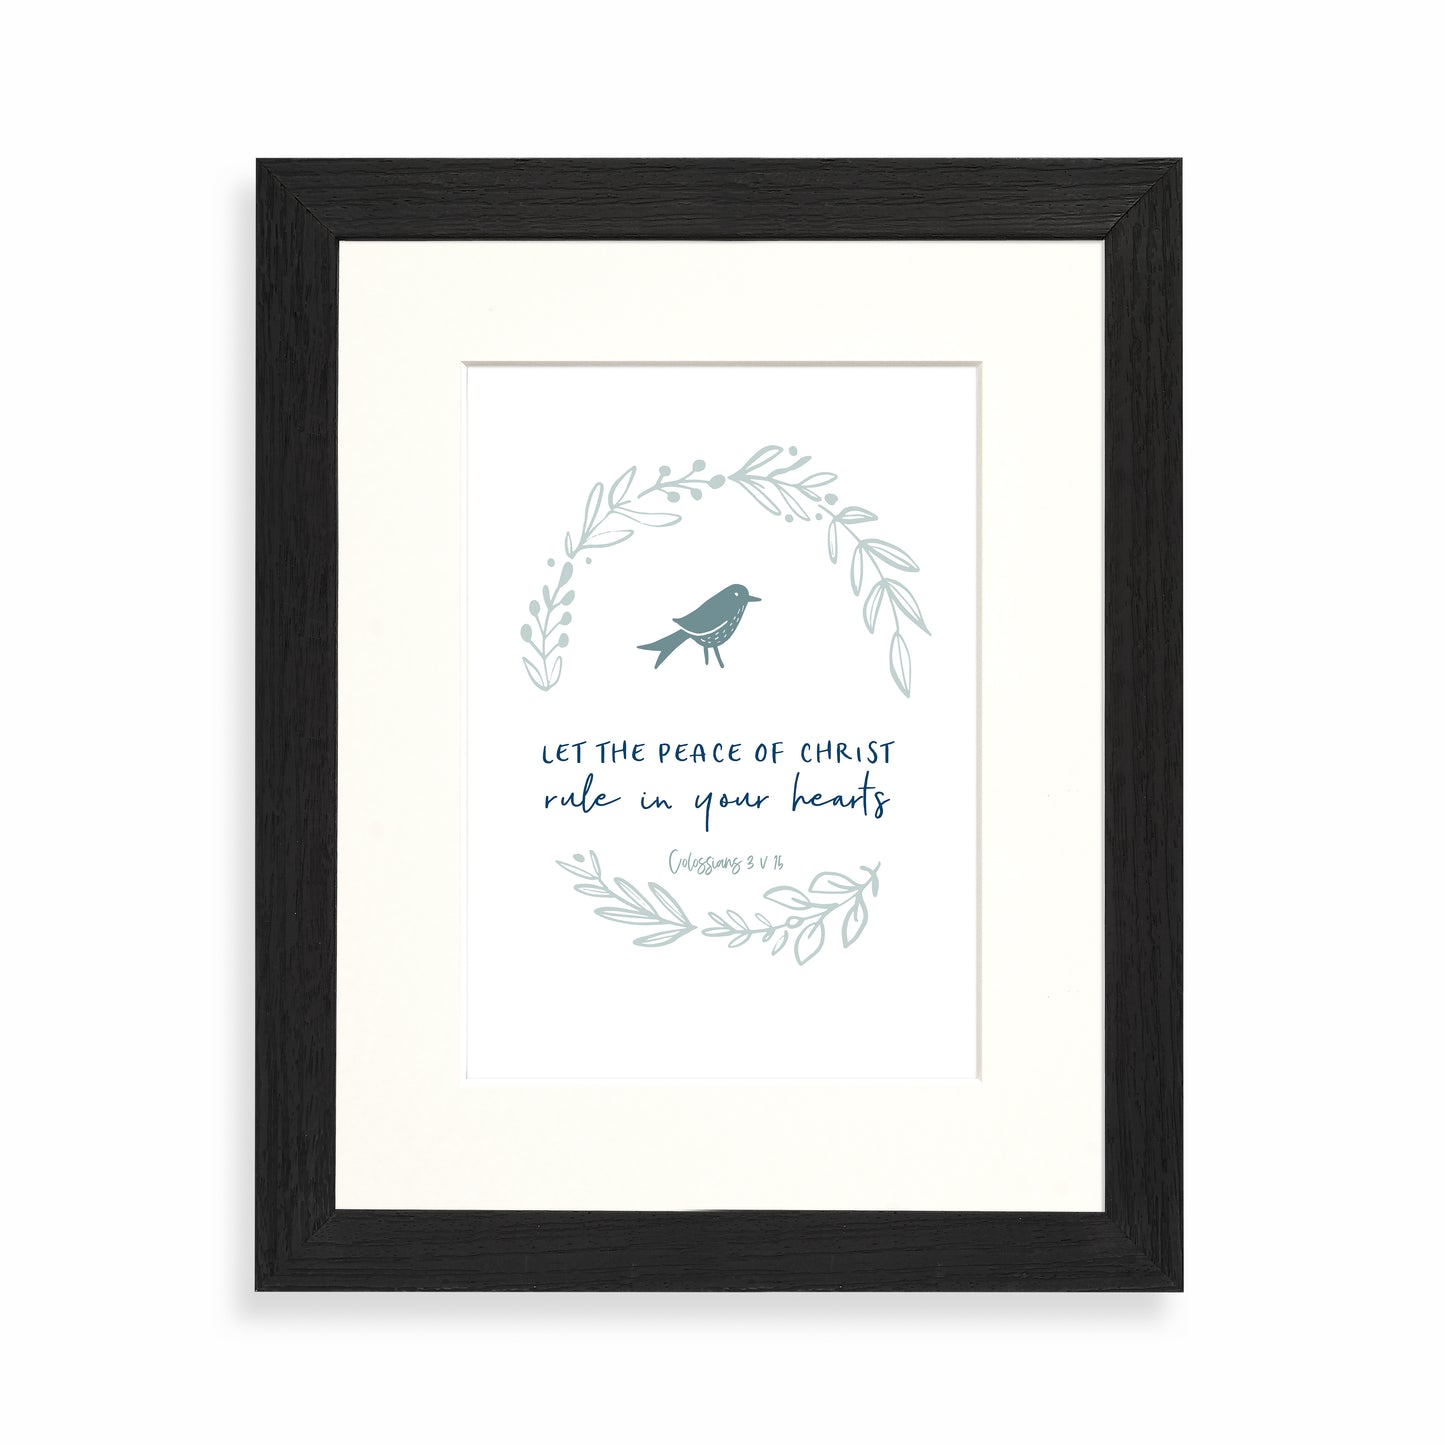 Let the peace of Christ rule in your hearts framed print